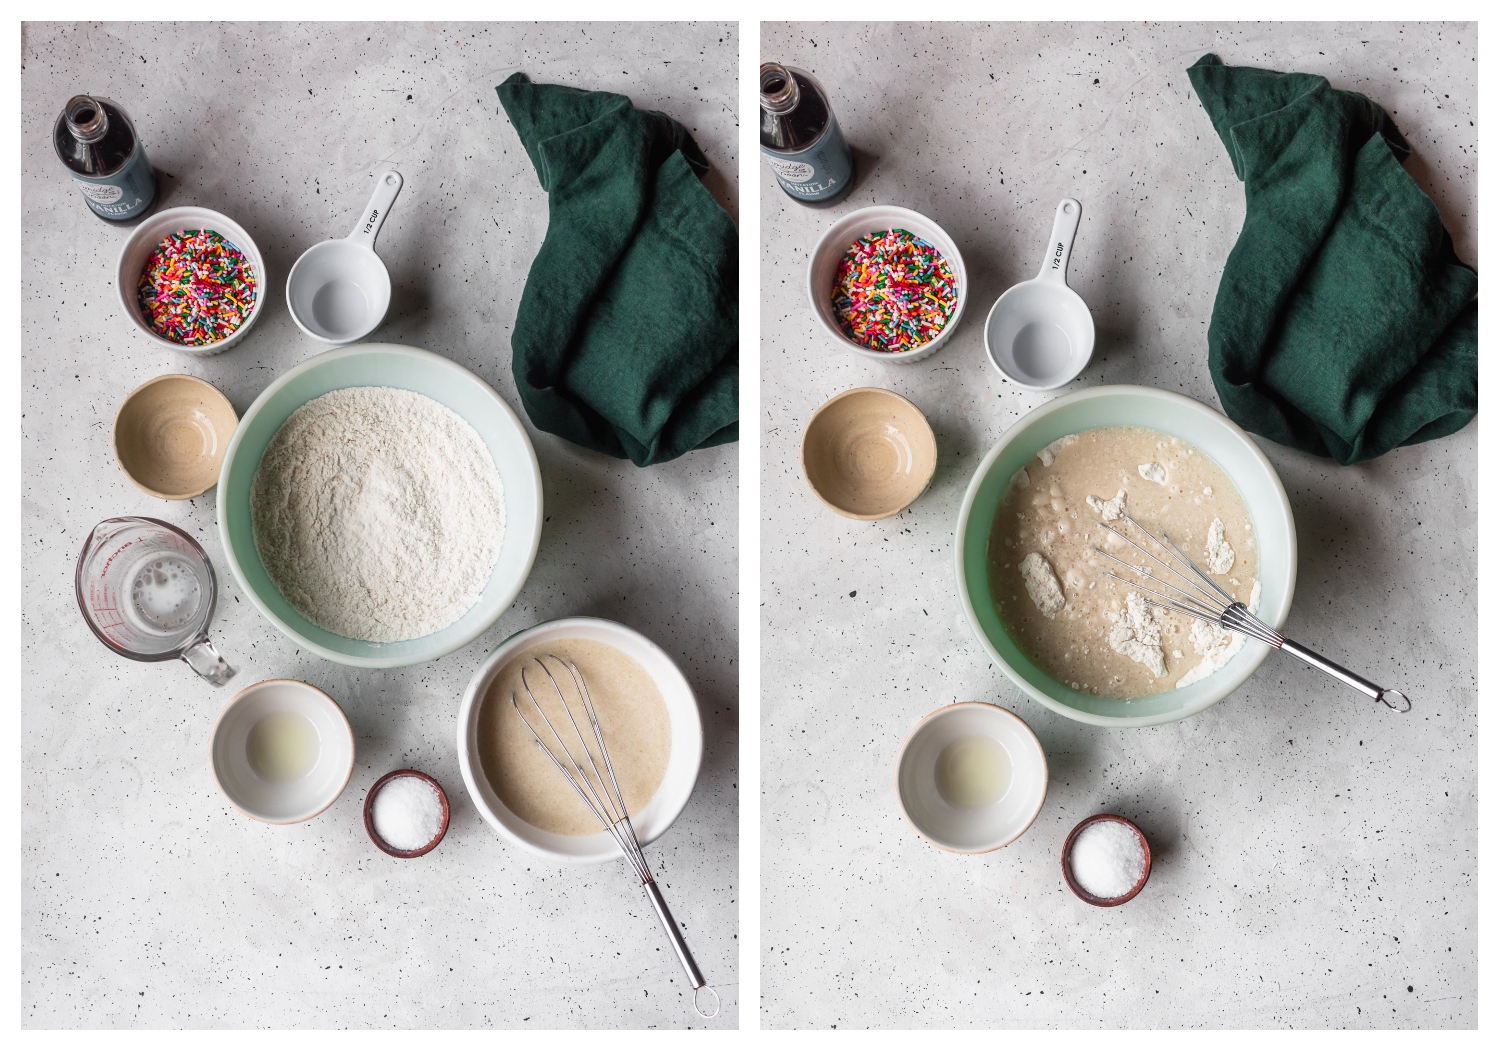 A bird's eye shot of two photos of cake ingredients being stirred together on a grey counter next to baking tools and an emerald green linen.